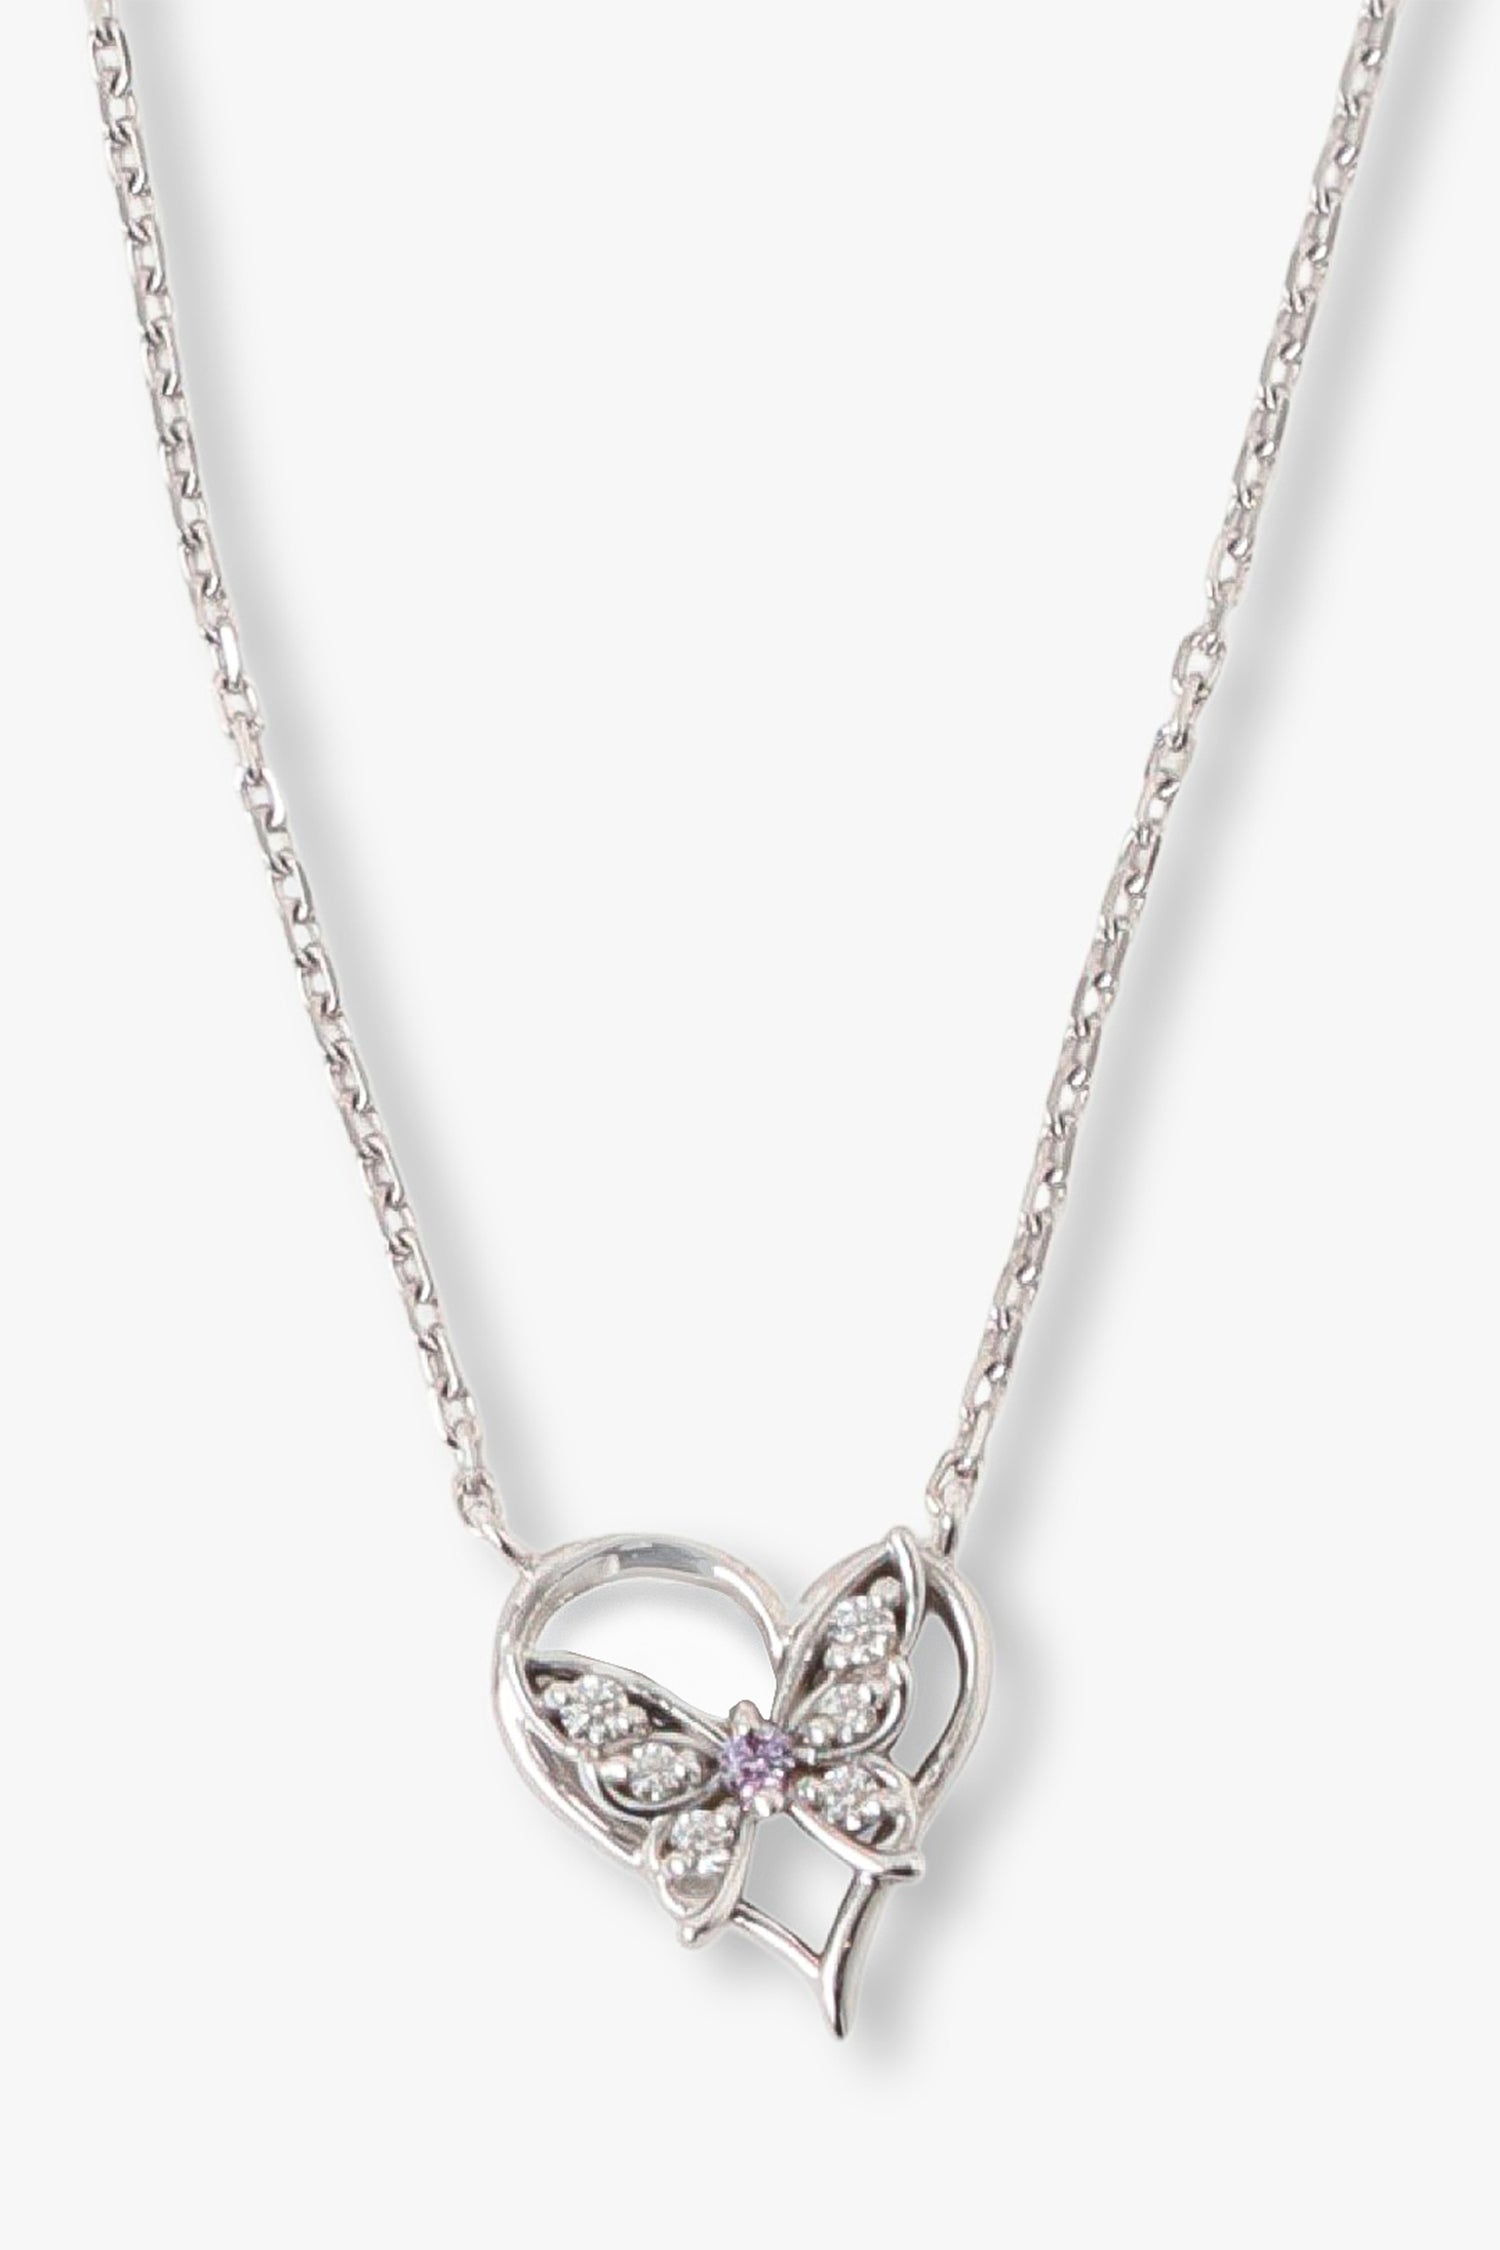 Pendant is a silver heart shaped with a butterfly with gemstones in the wings